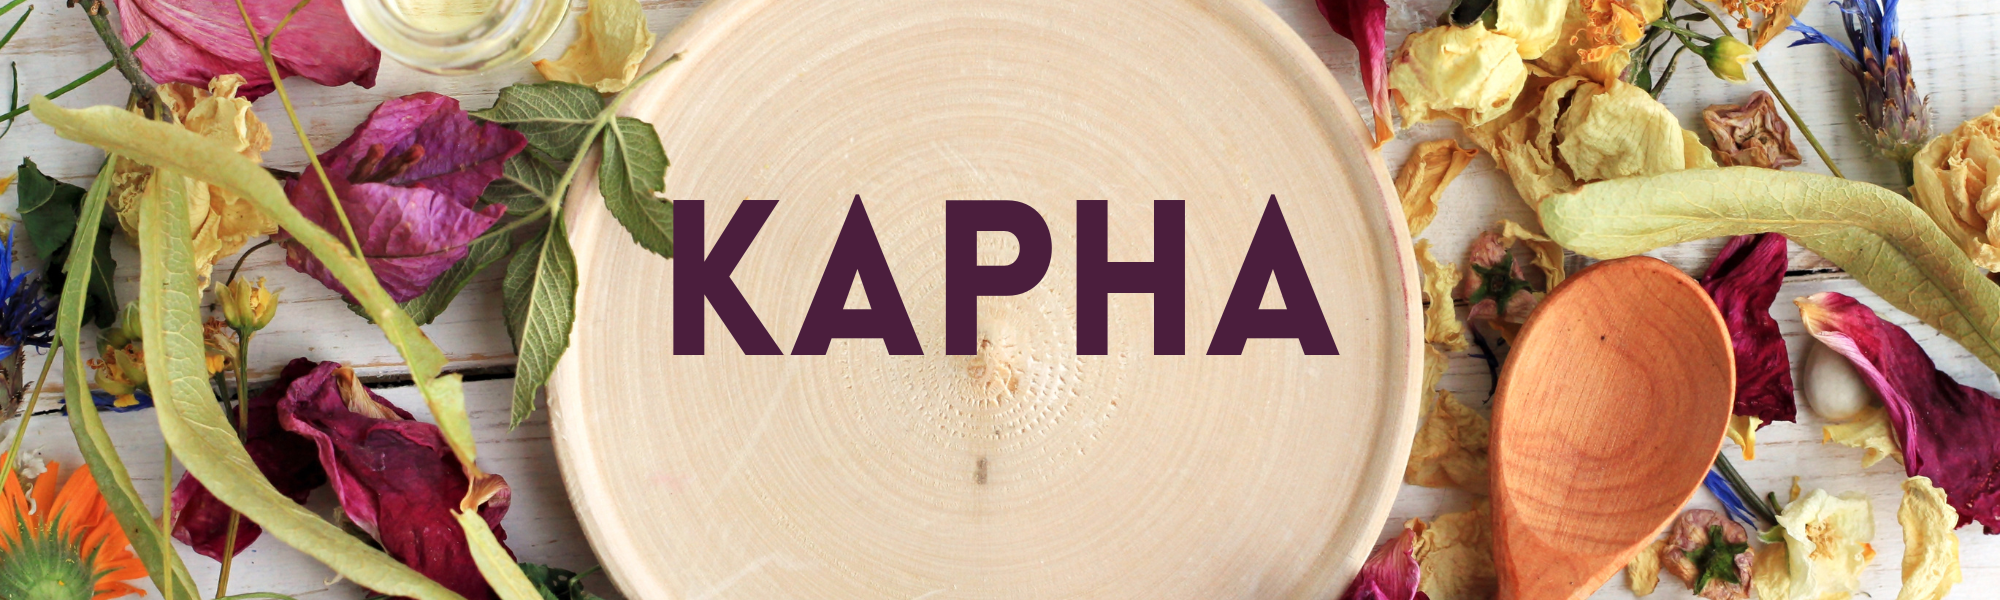 Kapha Suggested Products